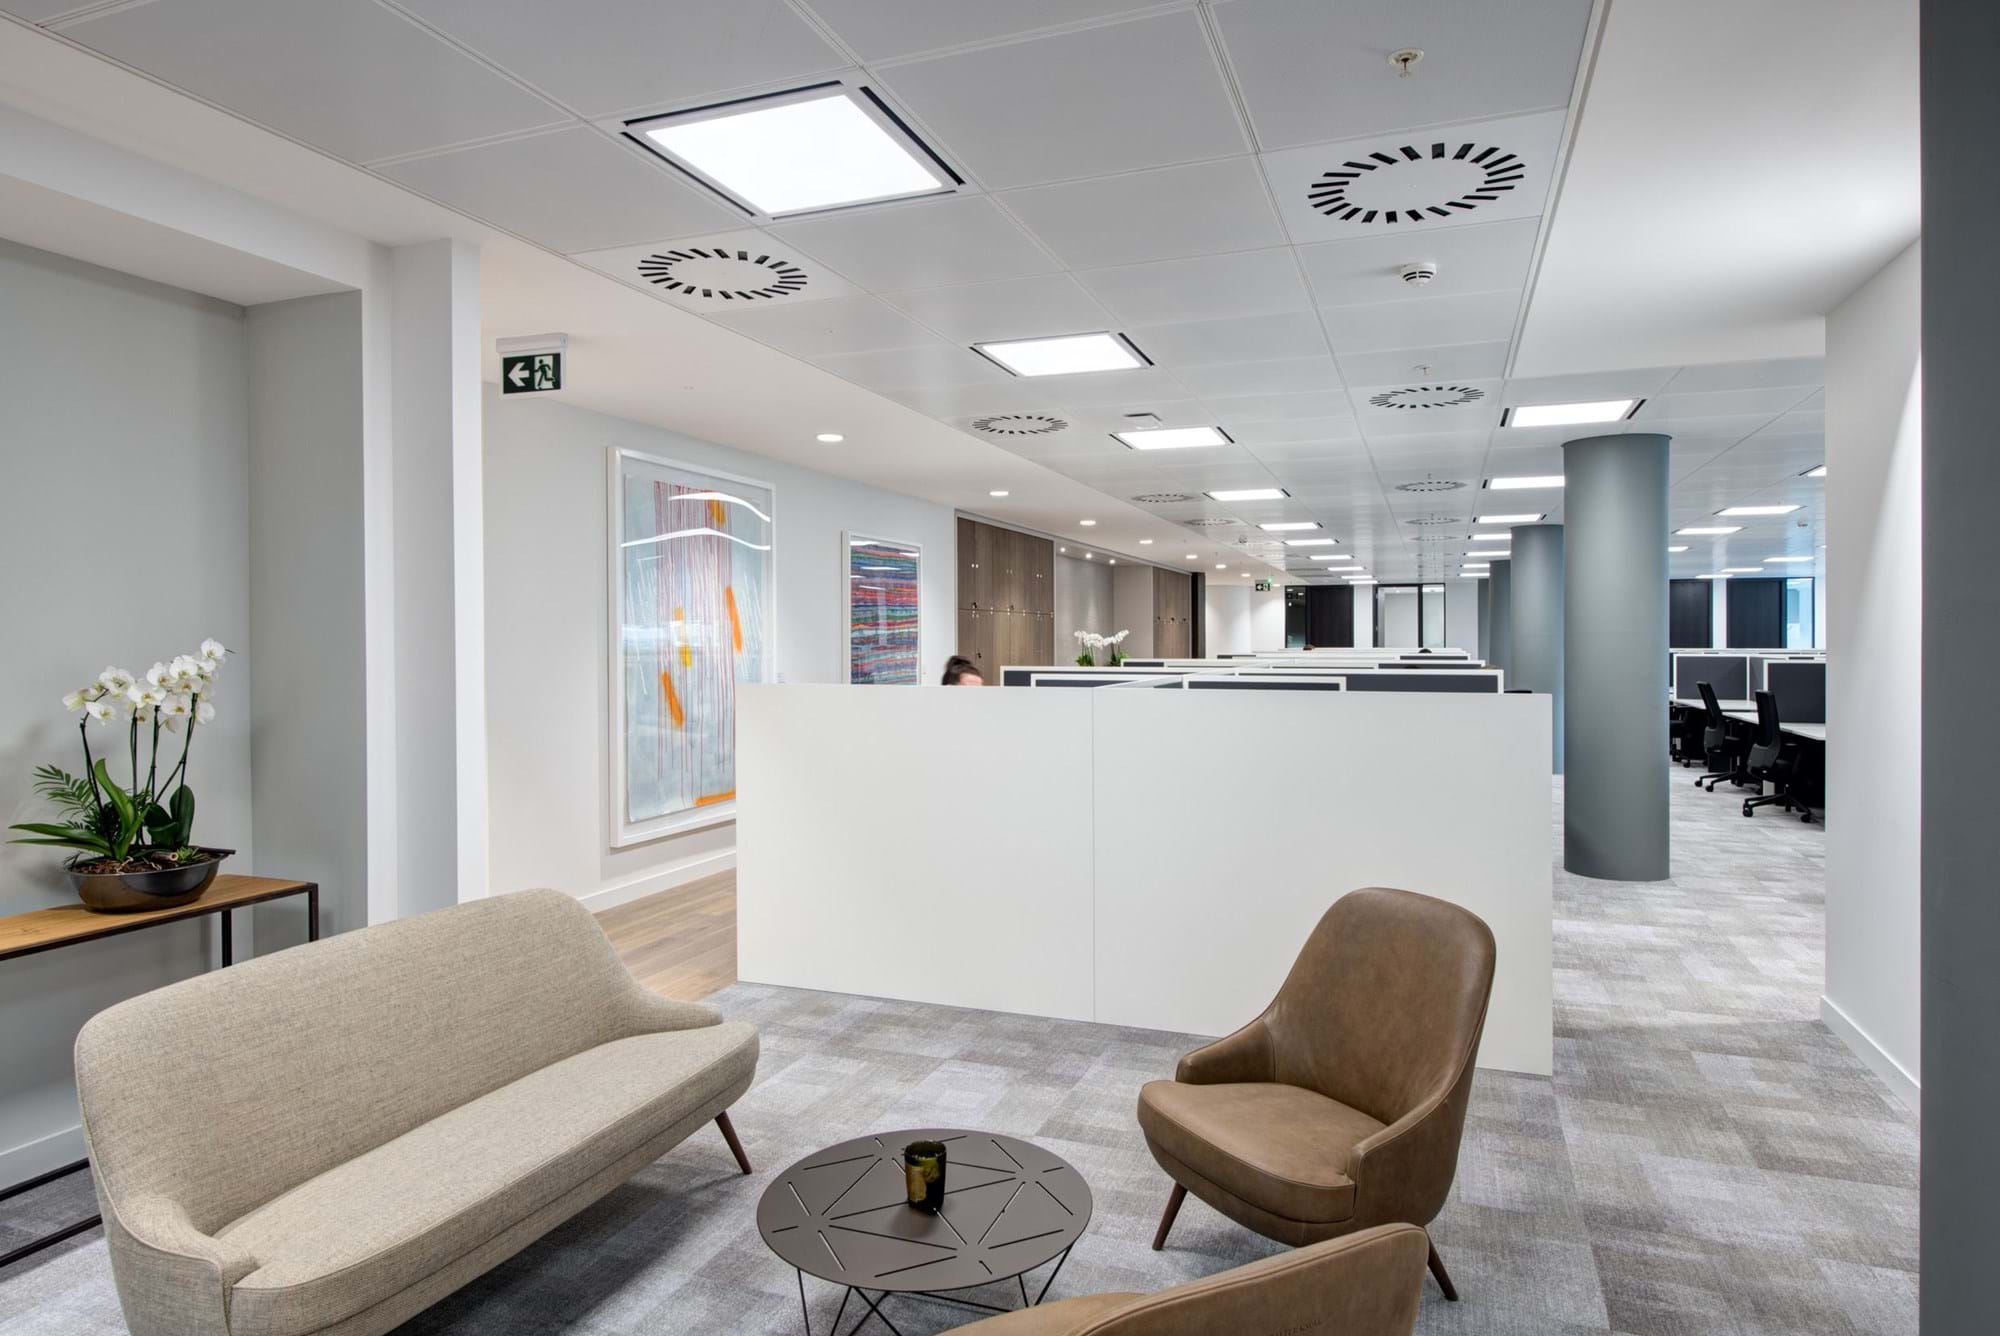 Modus Workspace office design, fit out and refurbishment - Dimension Data - Dimension Data 15 highres sRGB.jpg